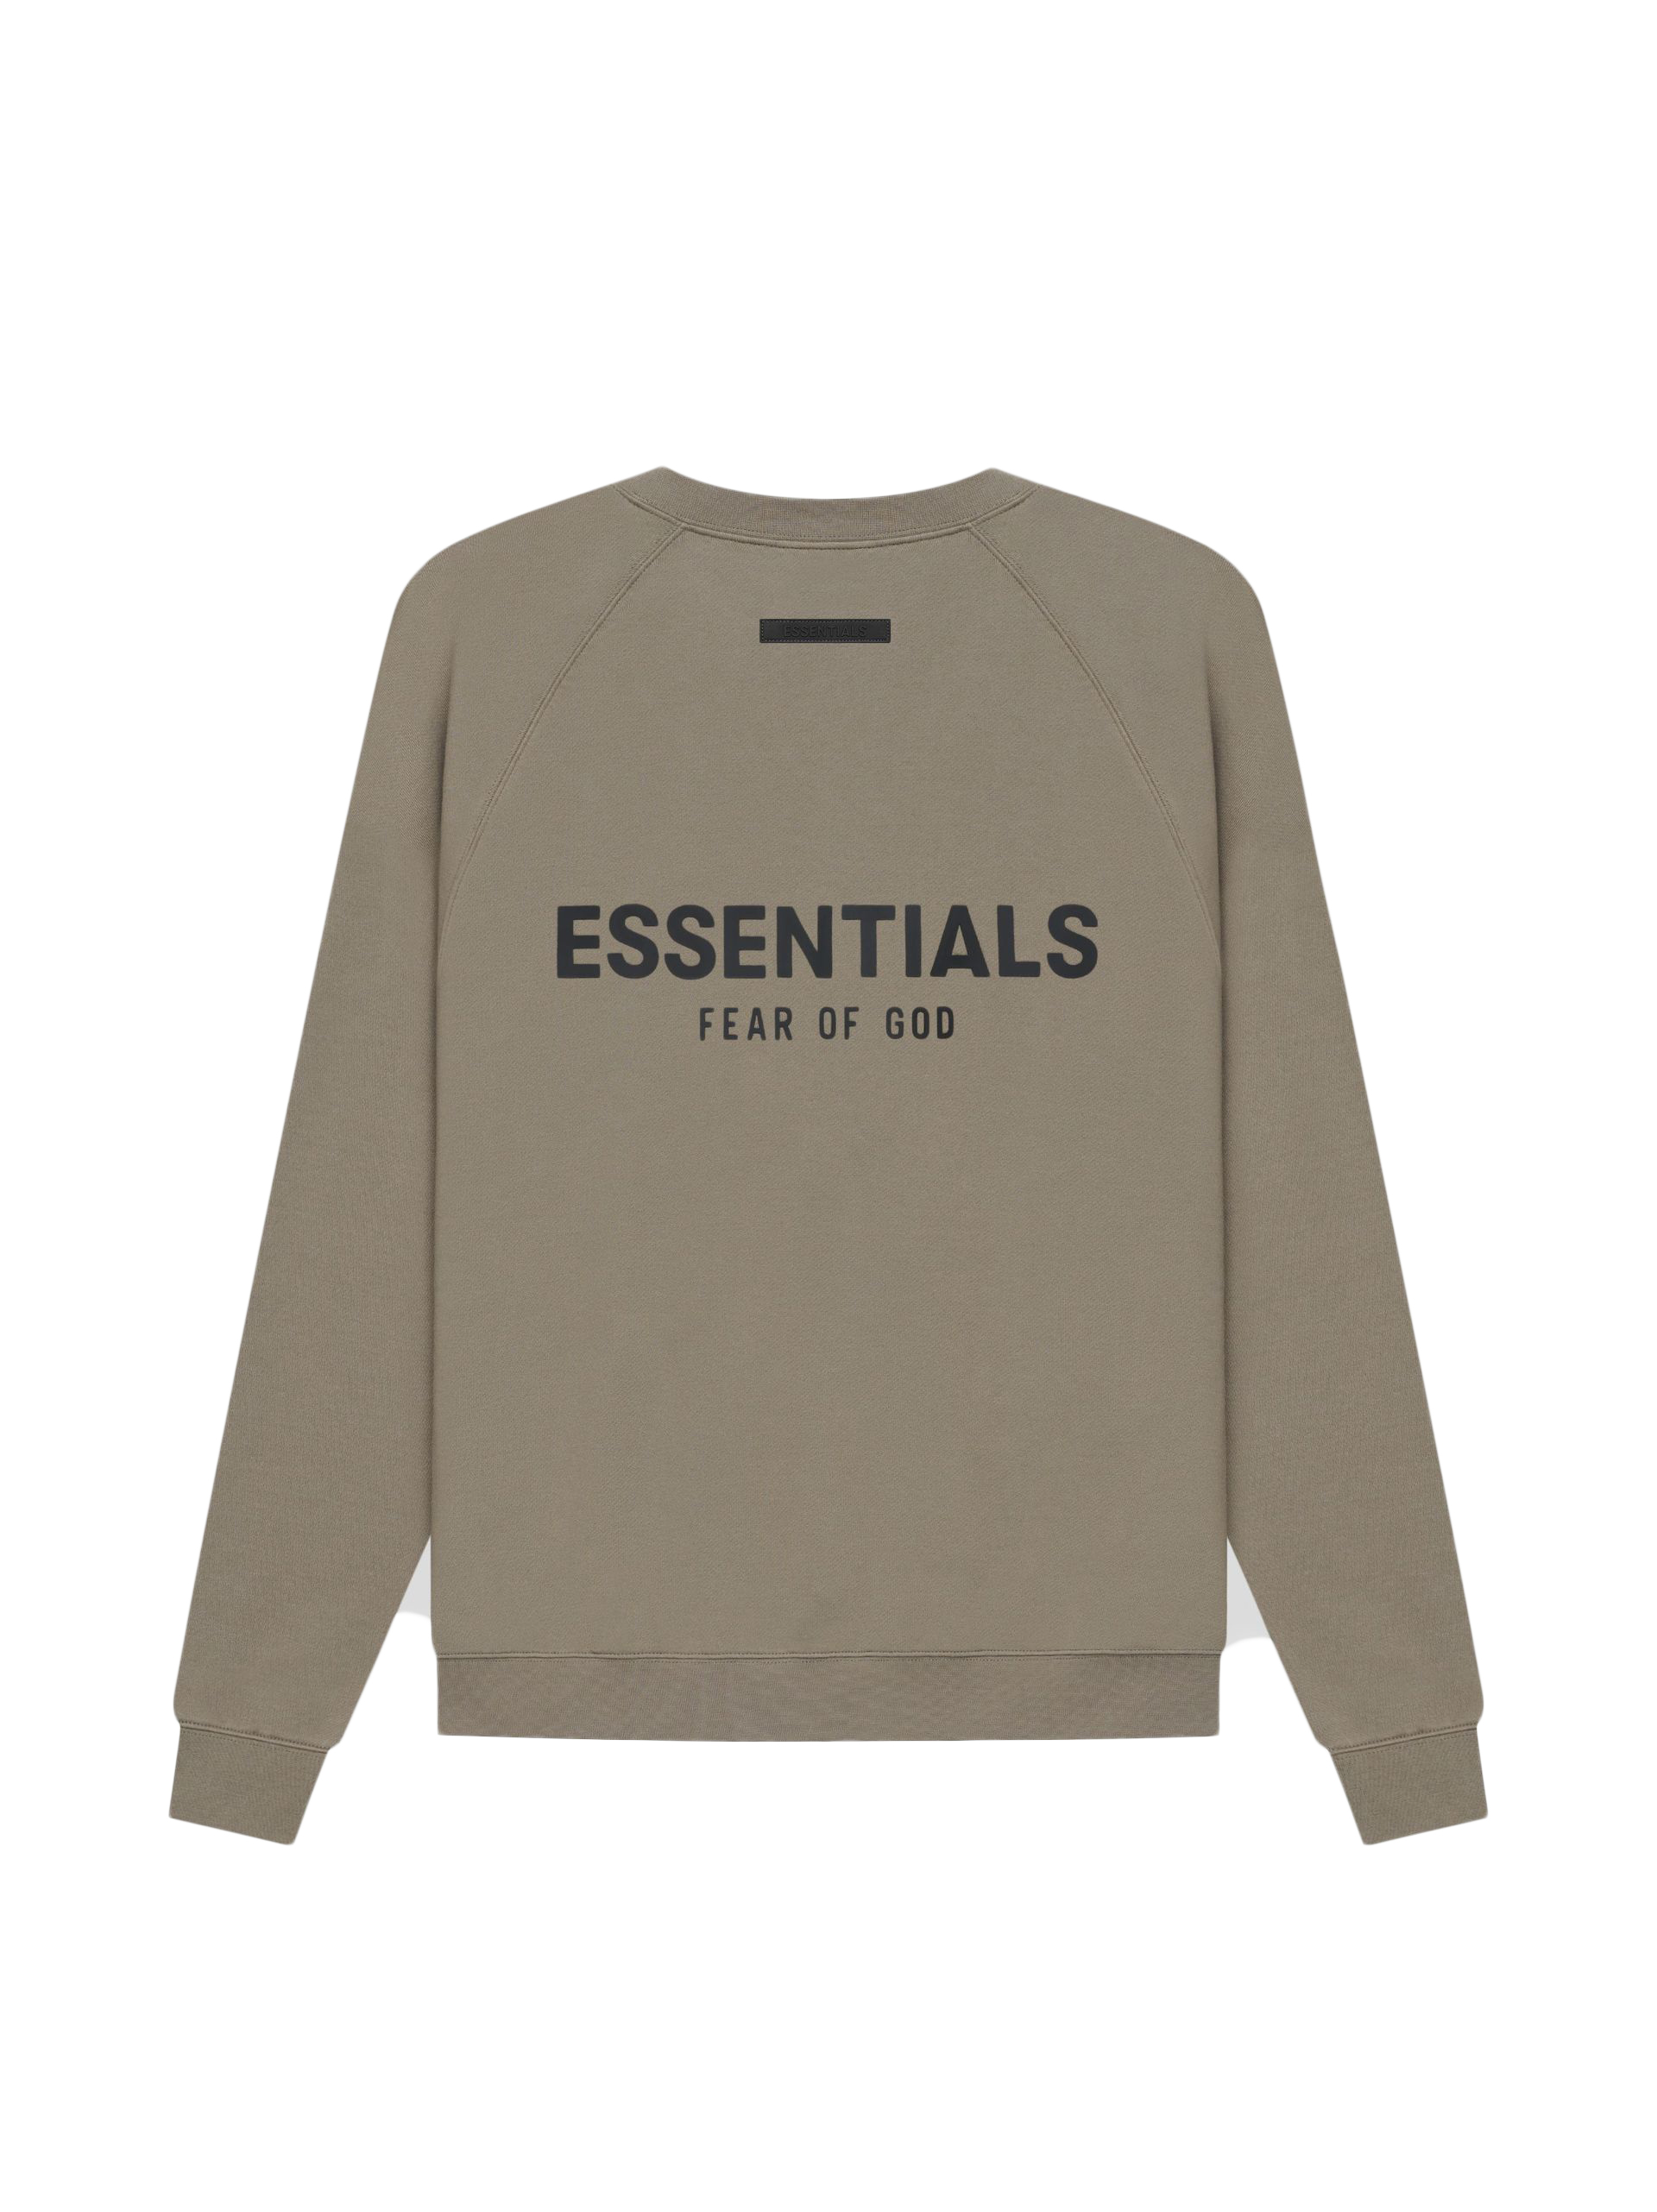 Fear of God Essentials Pull-Over Crewneck Taupe - SS21 - US